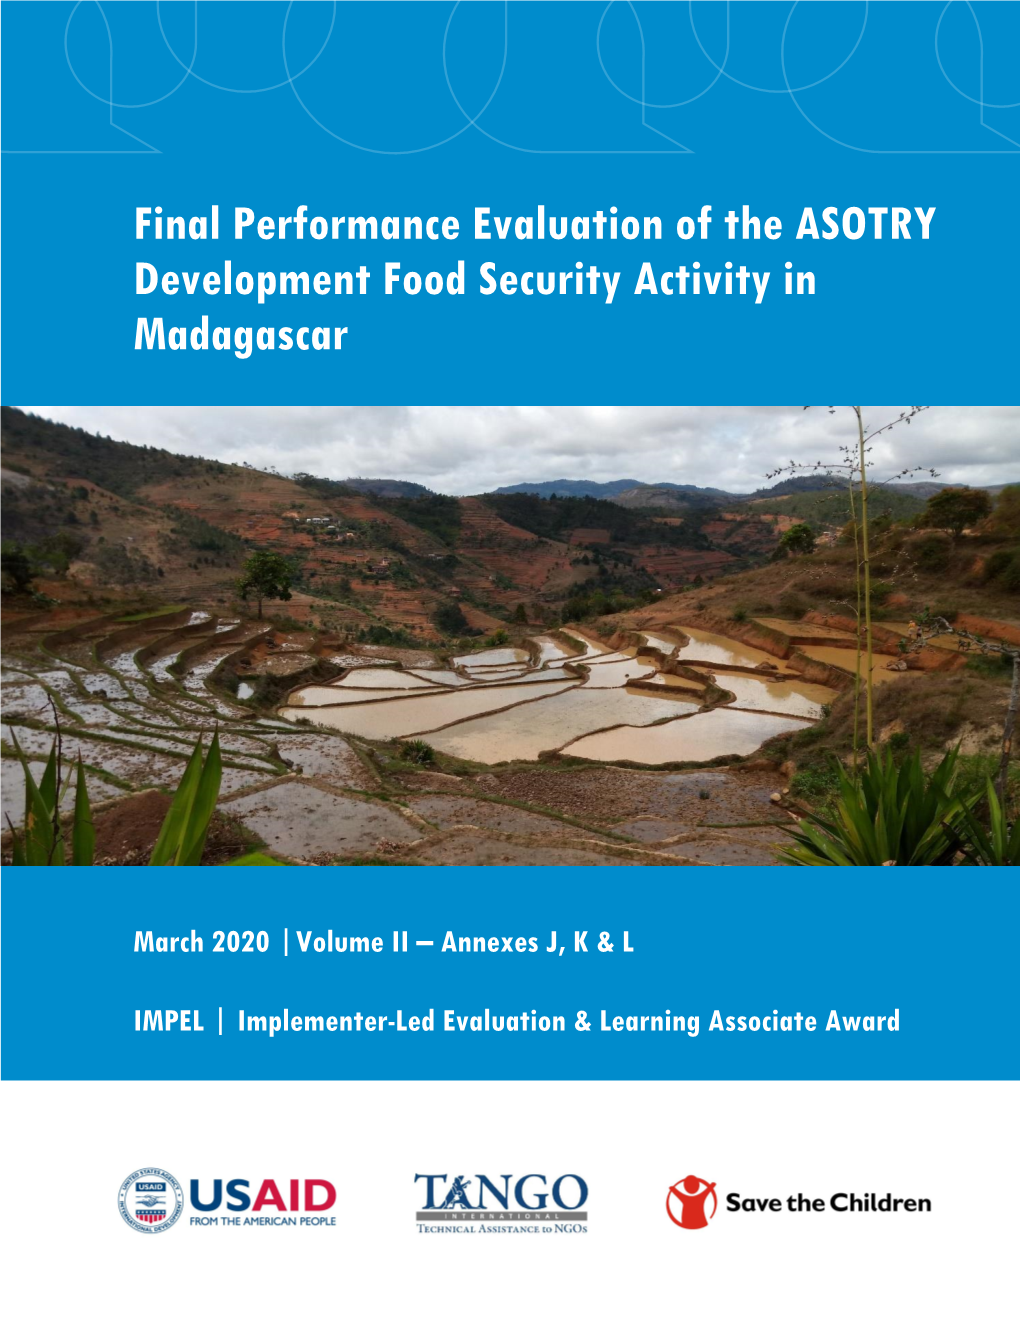 Final Performance Evaluation of the ASOTRY Development Food Security Activity in Madagascar